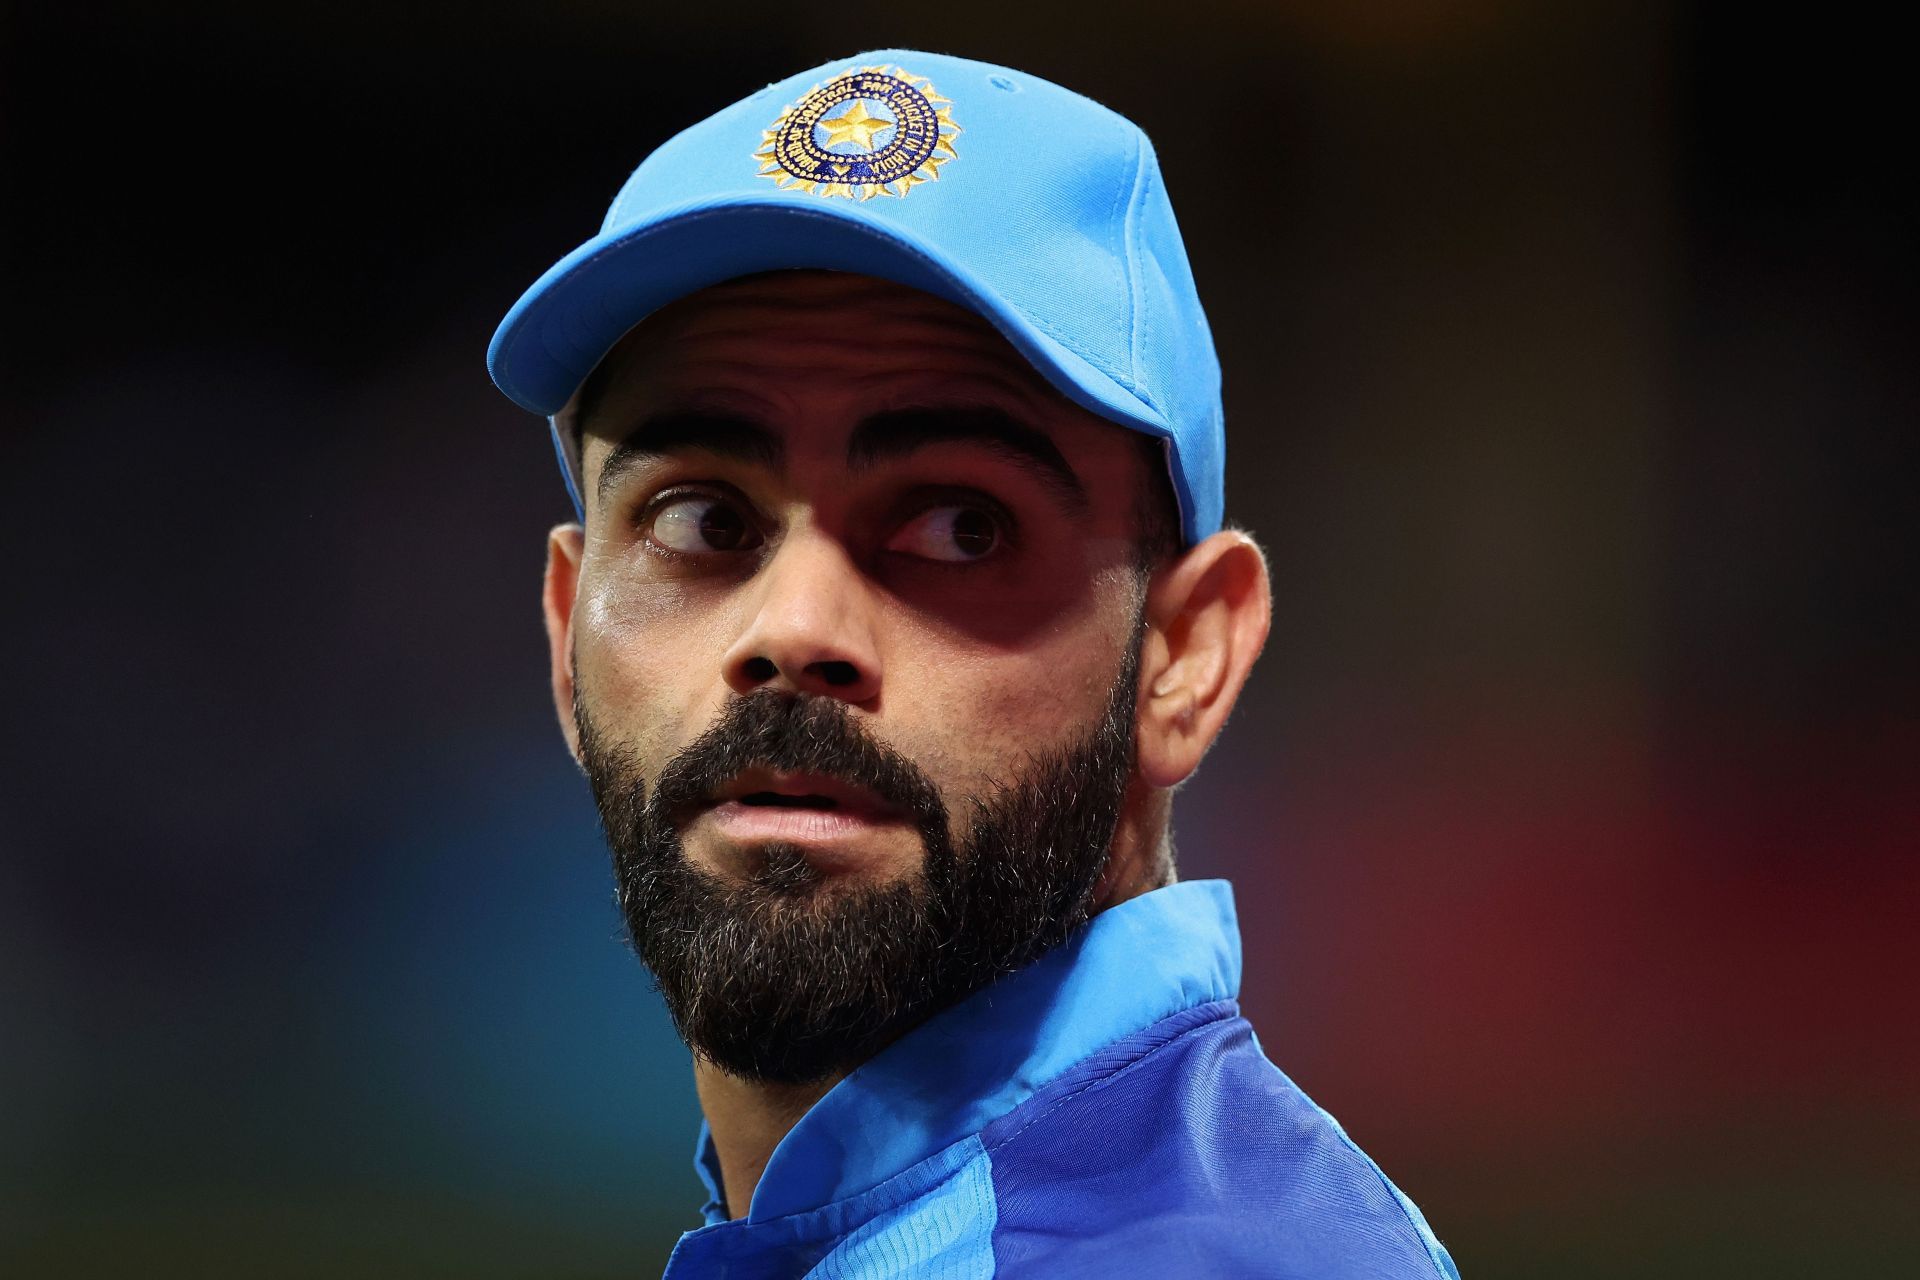 Virat Kohli has moved to the third spot on the Most Runs list (Image: Getty)